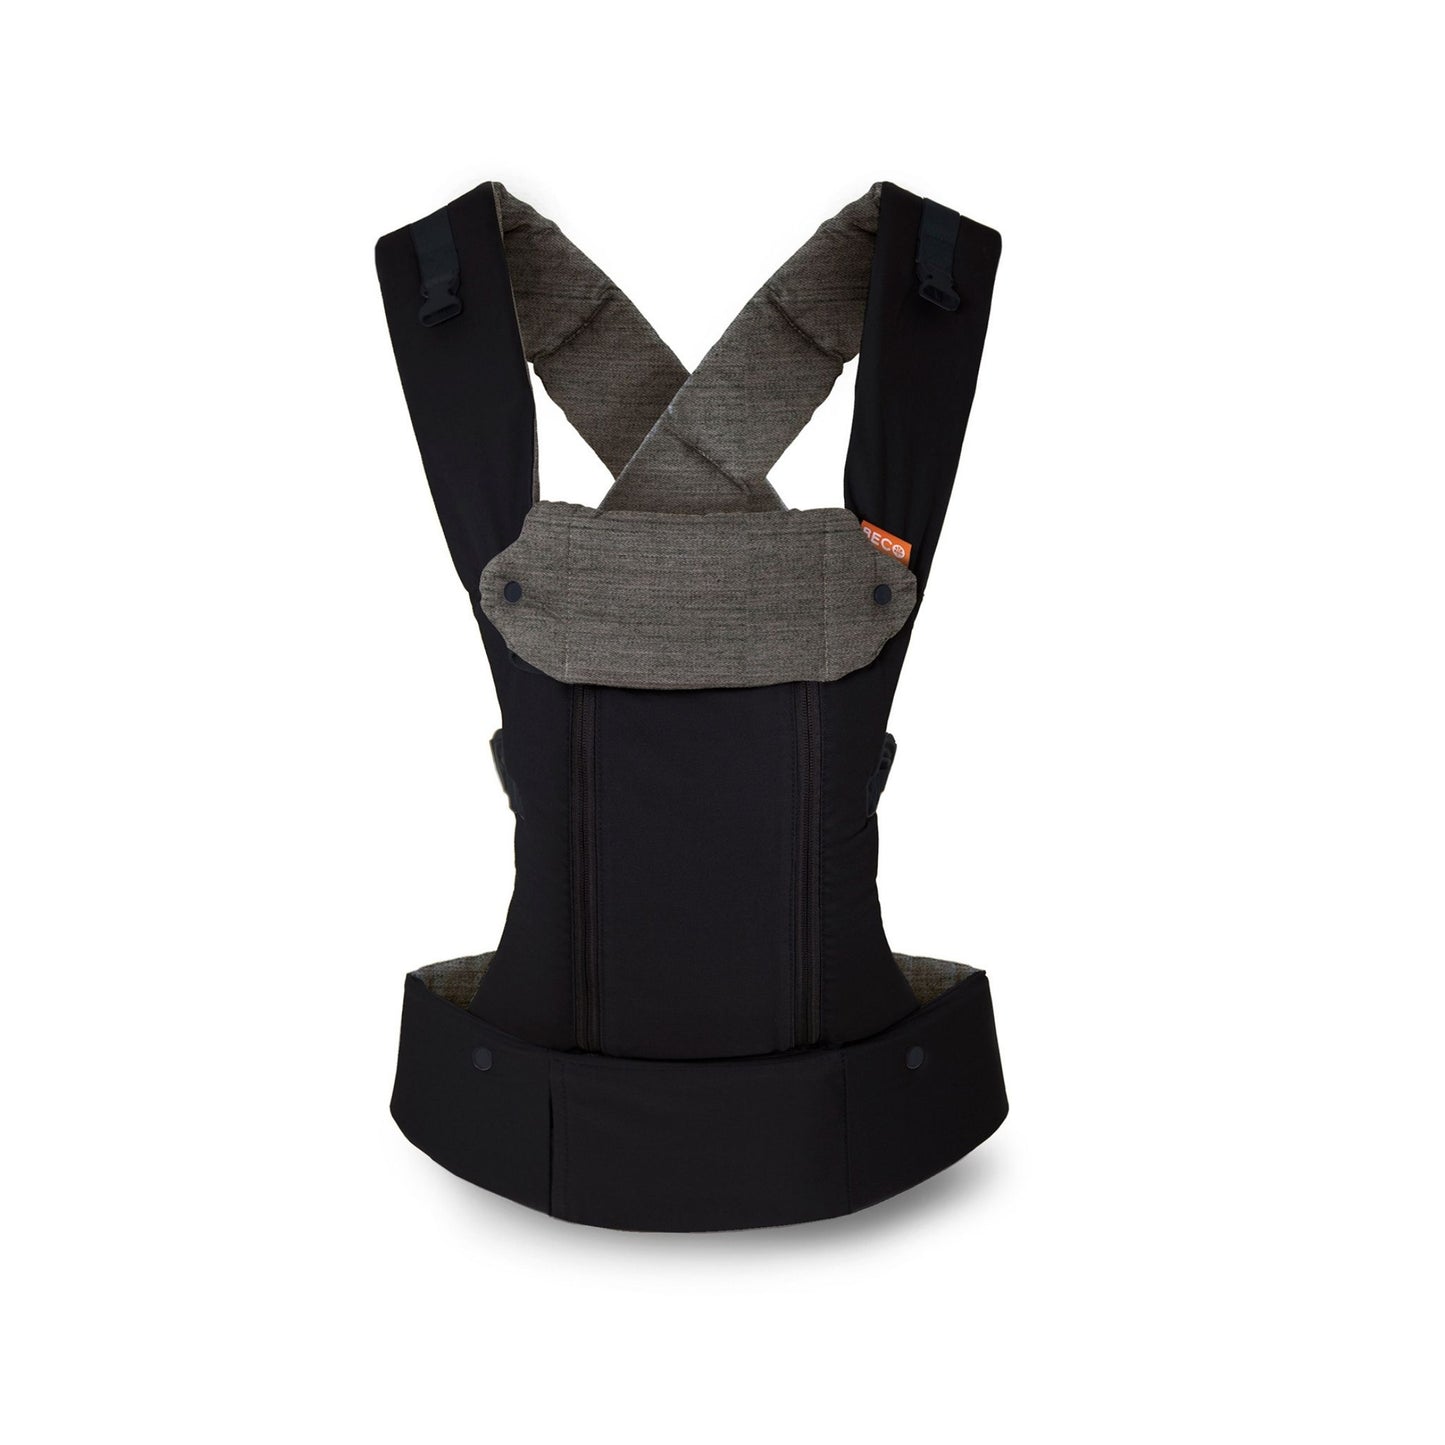 Product image of black Beco8 baby carrier with back panel zipped up